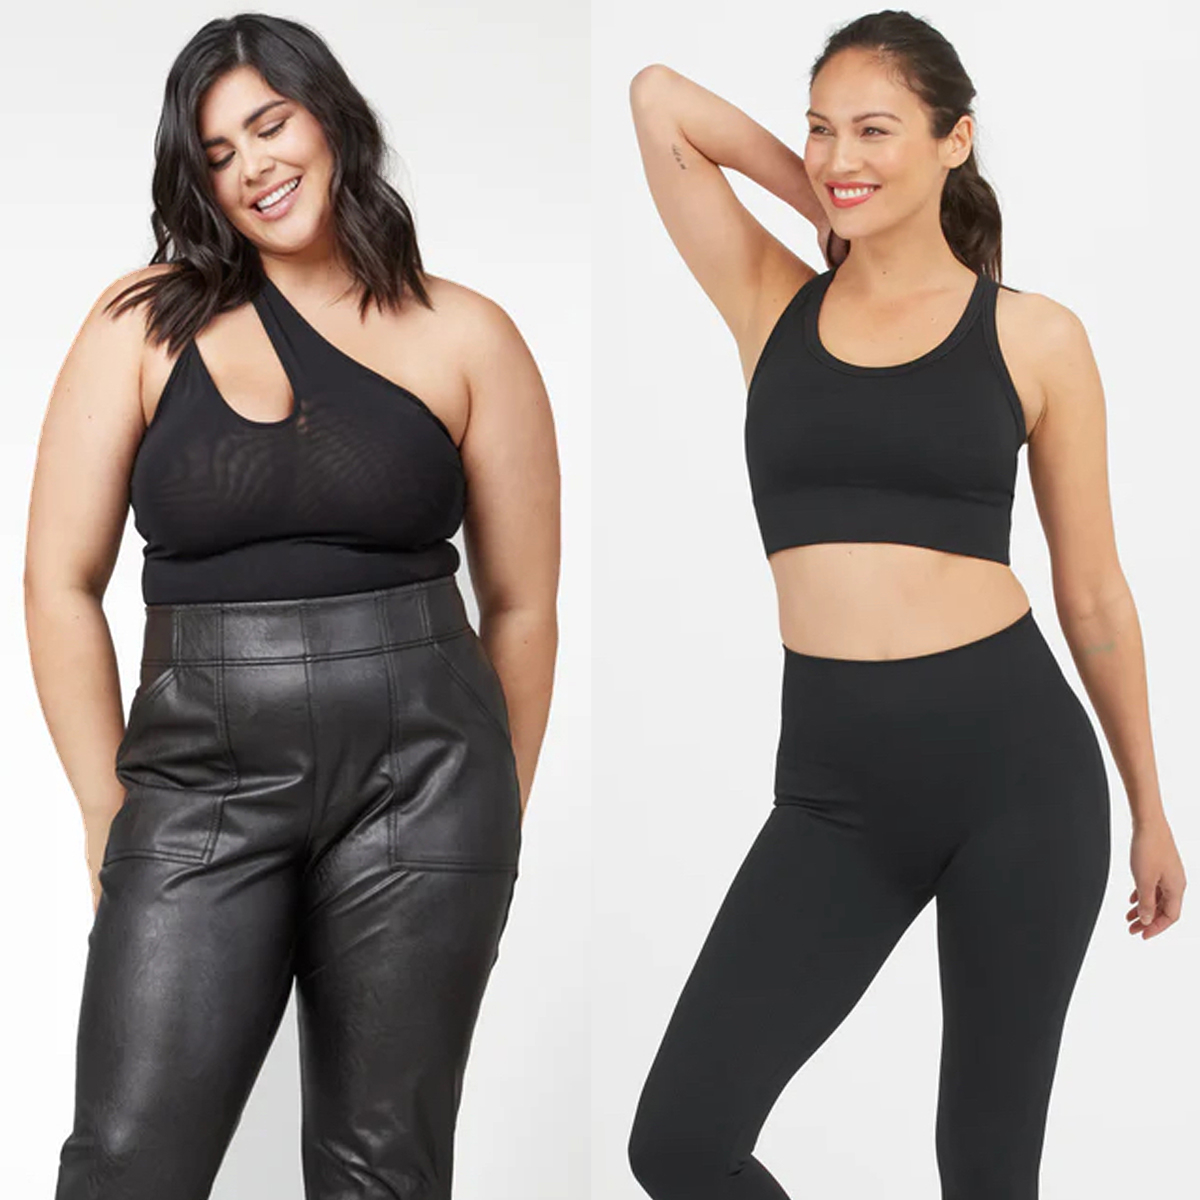 Celeb-loved Spanx Booty Boost Leggings Now Come in Spring Colors